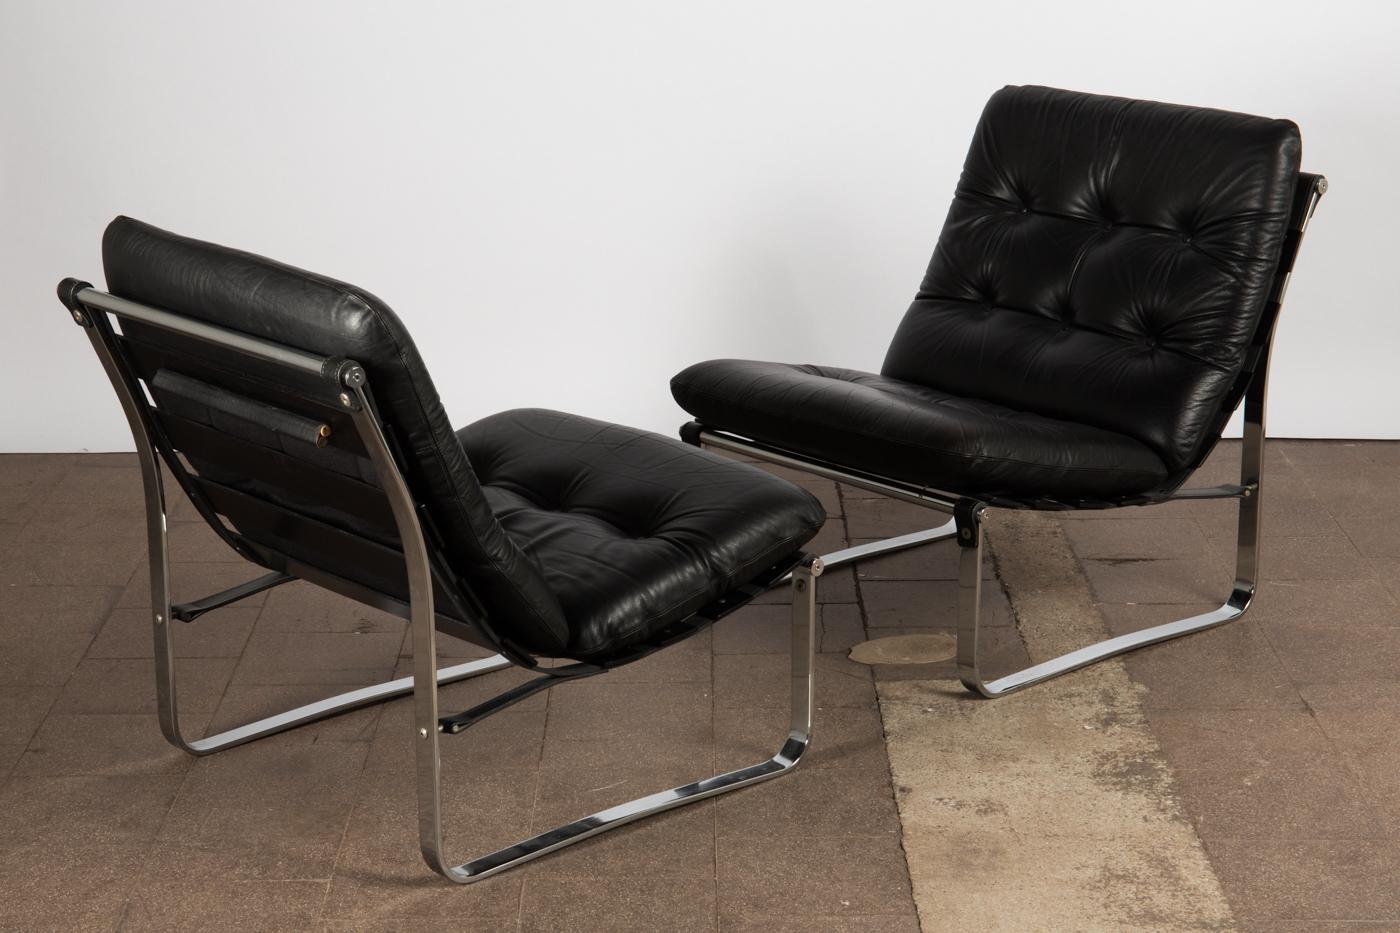 A pair of vintage Danish, midcentury black leather spring chairs by Ingmar Relling, for Westnofa Furniture.